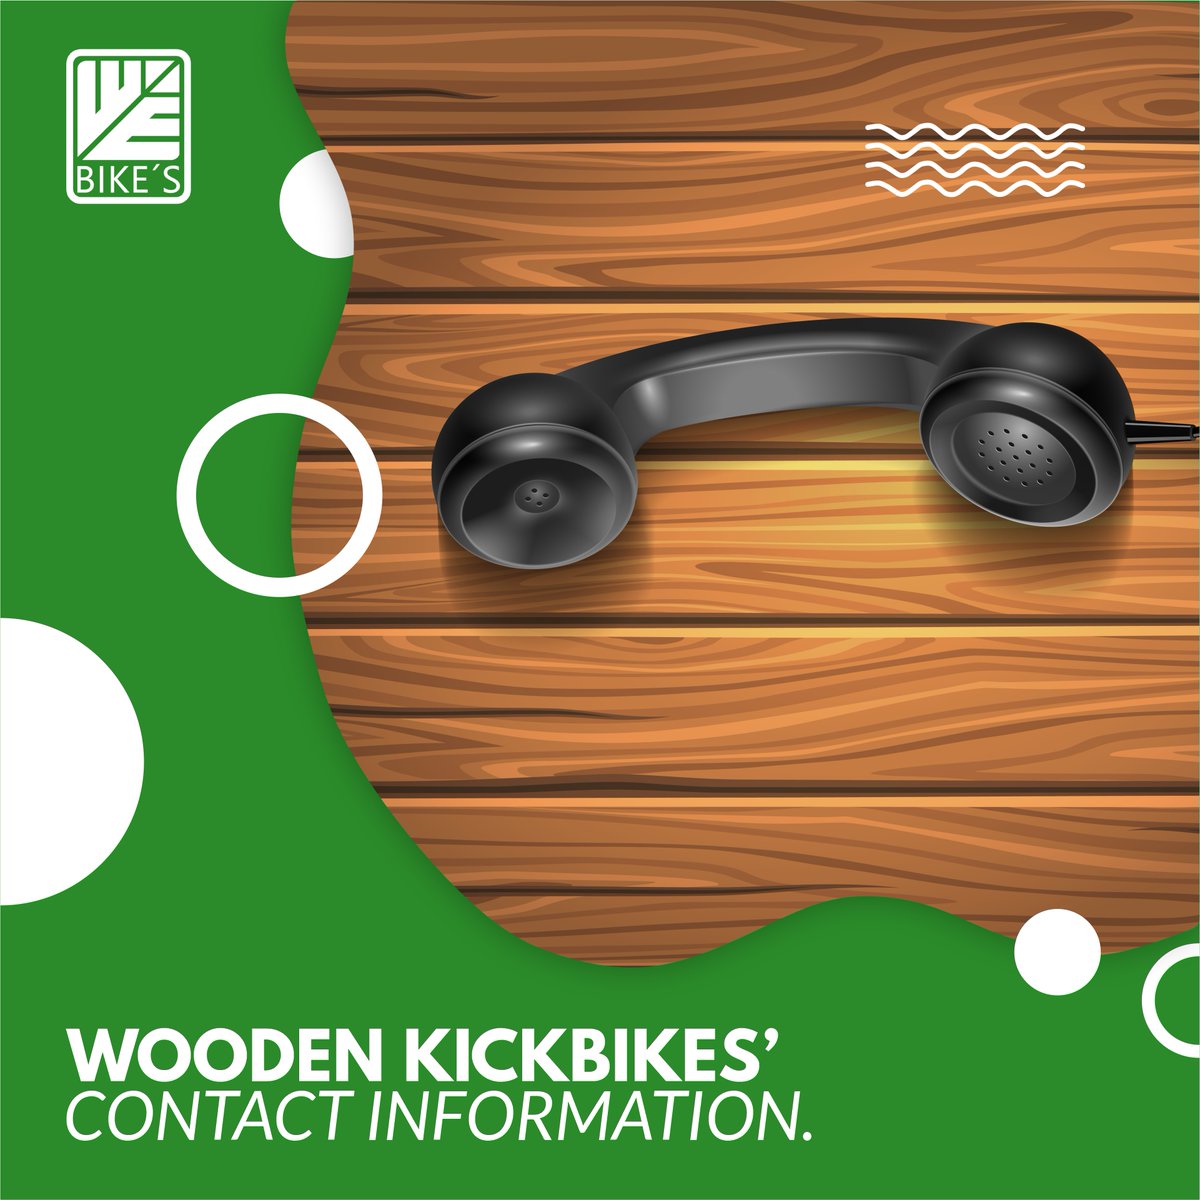 Be part of the innovation: Our wooden kickbikes are the environmentally friendly and climate-friendly alternative to conventional scooters.
--
📲 49(0)176-74478914
📧 info@wooden-kickbike.de
.
#woodenkickbikes #wooden #unique #handmade #webikes #woodenscooter #bikes